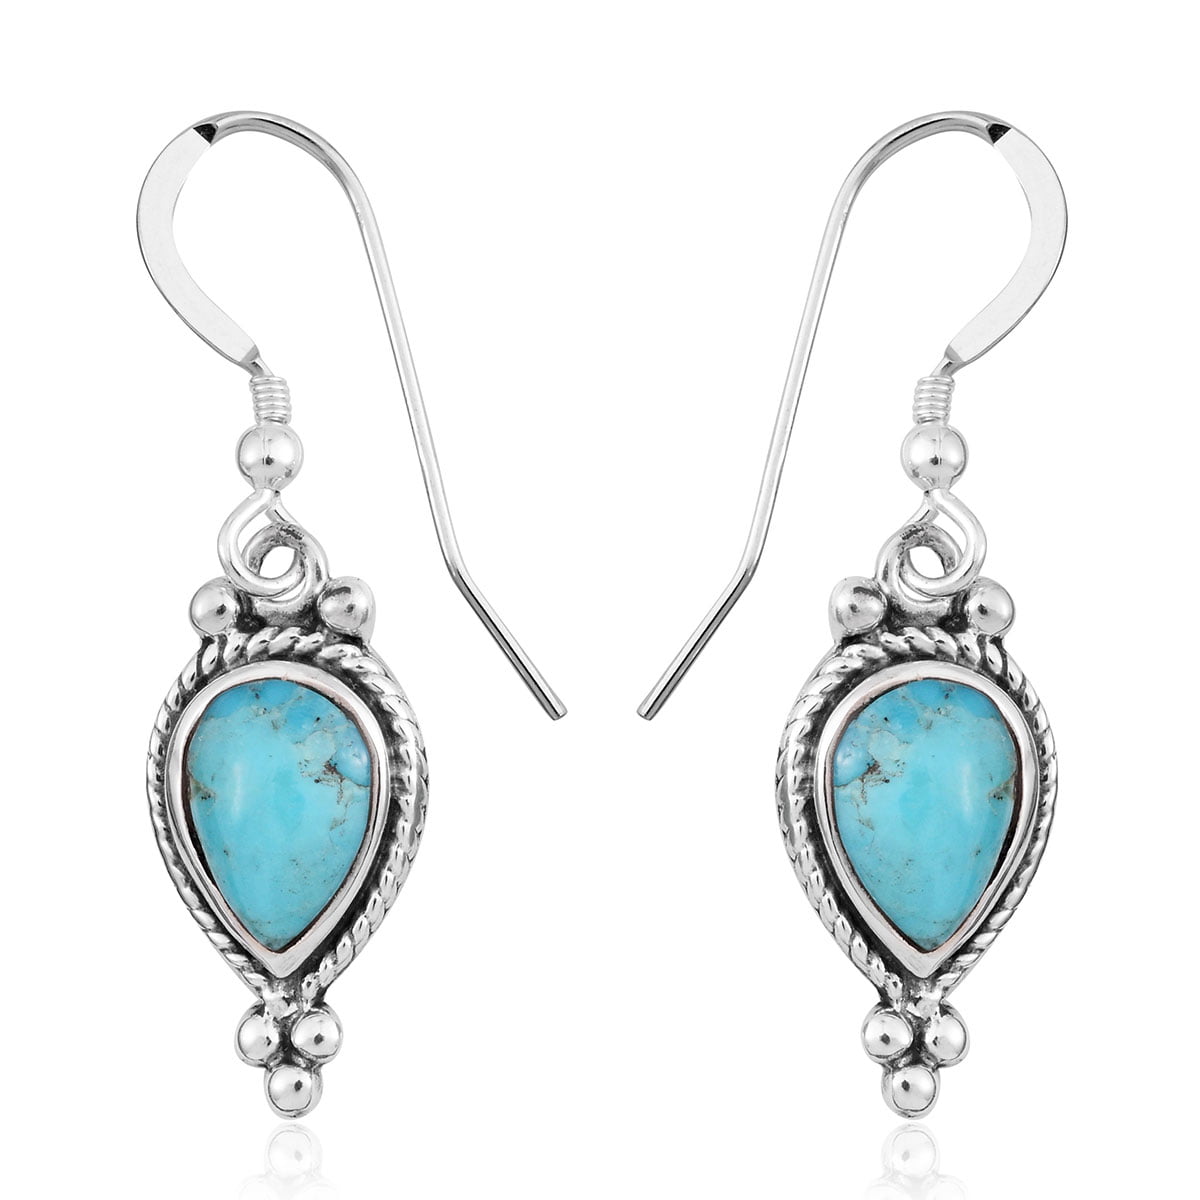 Blue Marquise Oval Crystal Simulated Turquoise Color December Birthstone Hypoallergenic Rhodium Plated Simple Drop Dangle Leverback Earrings Gift Idea